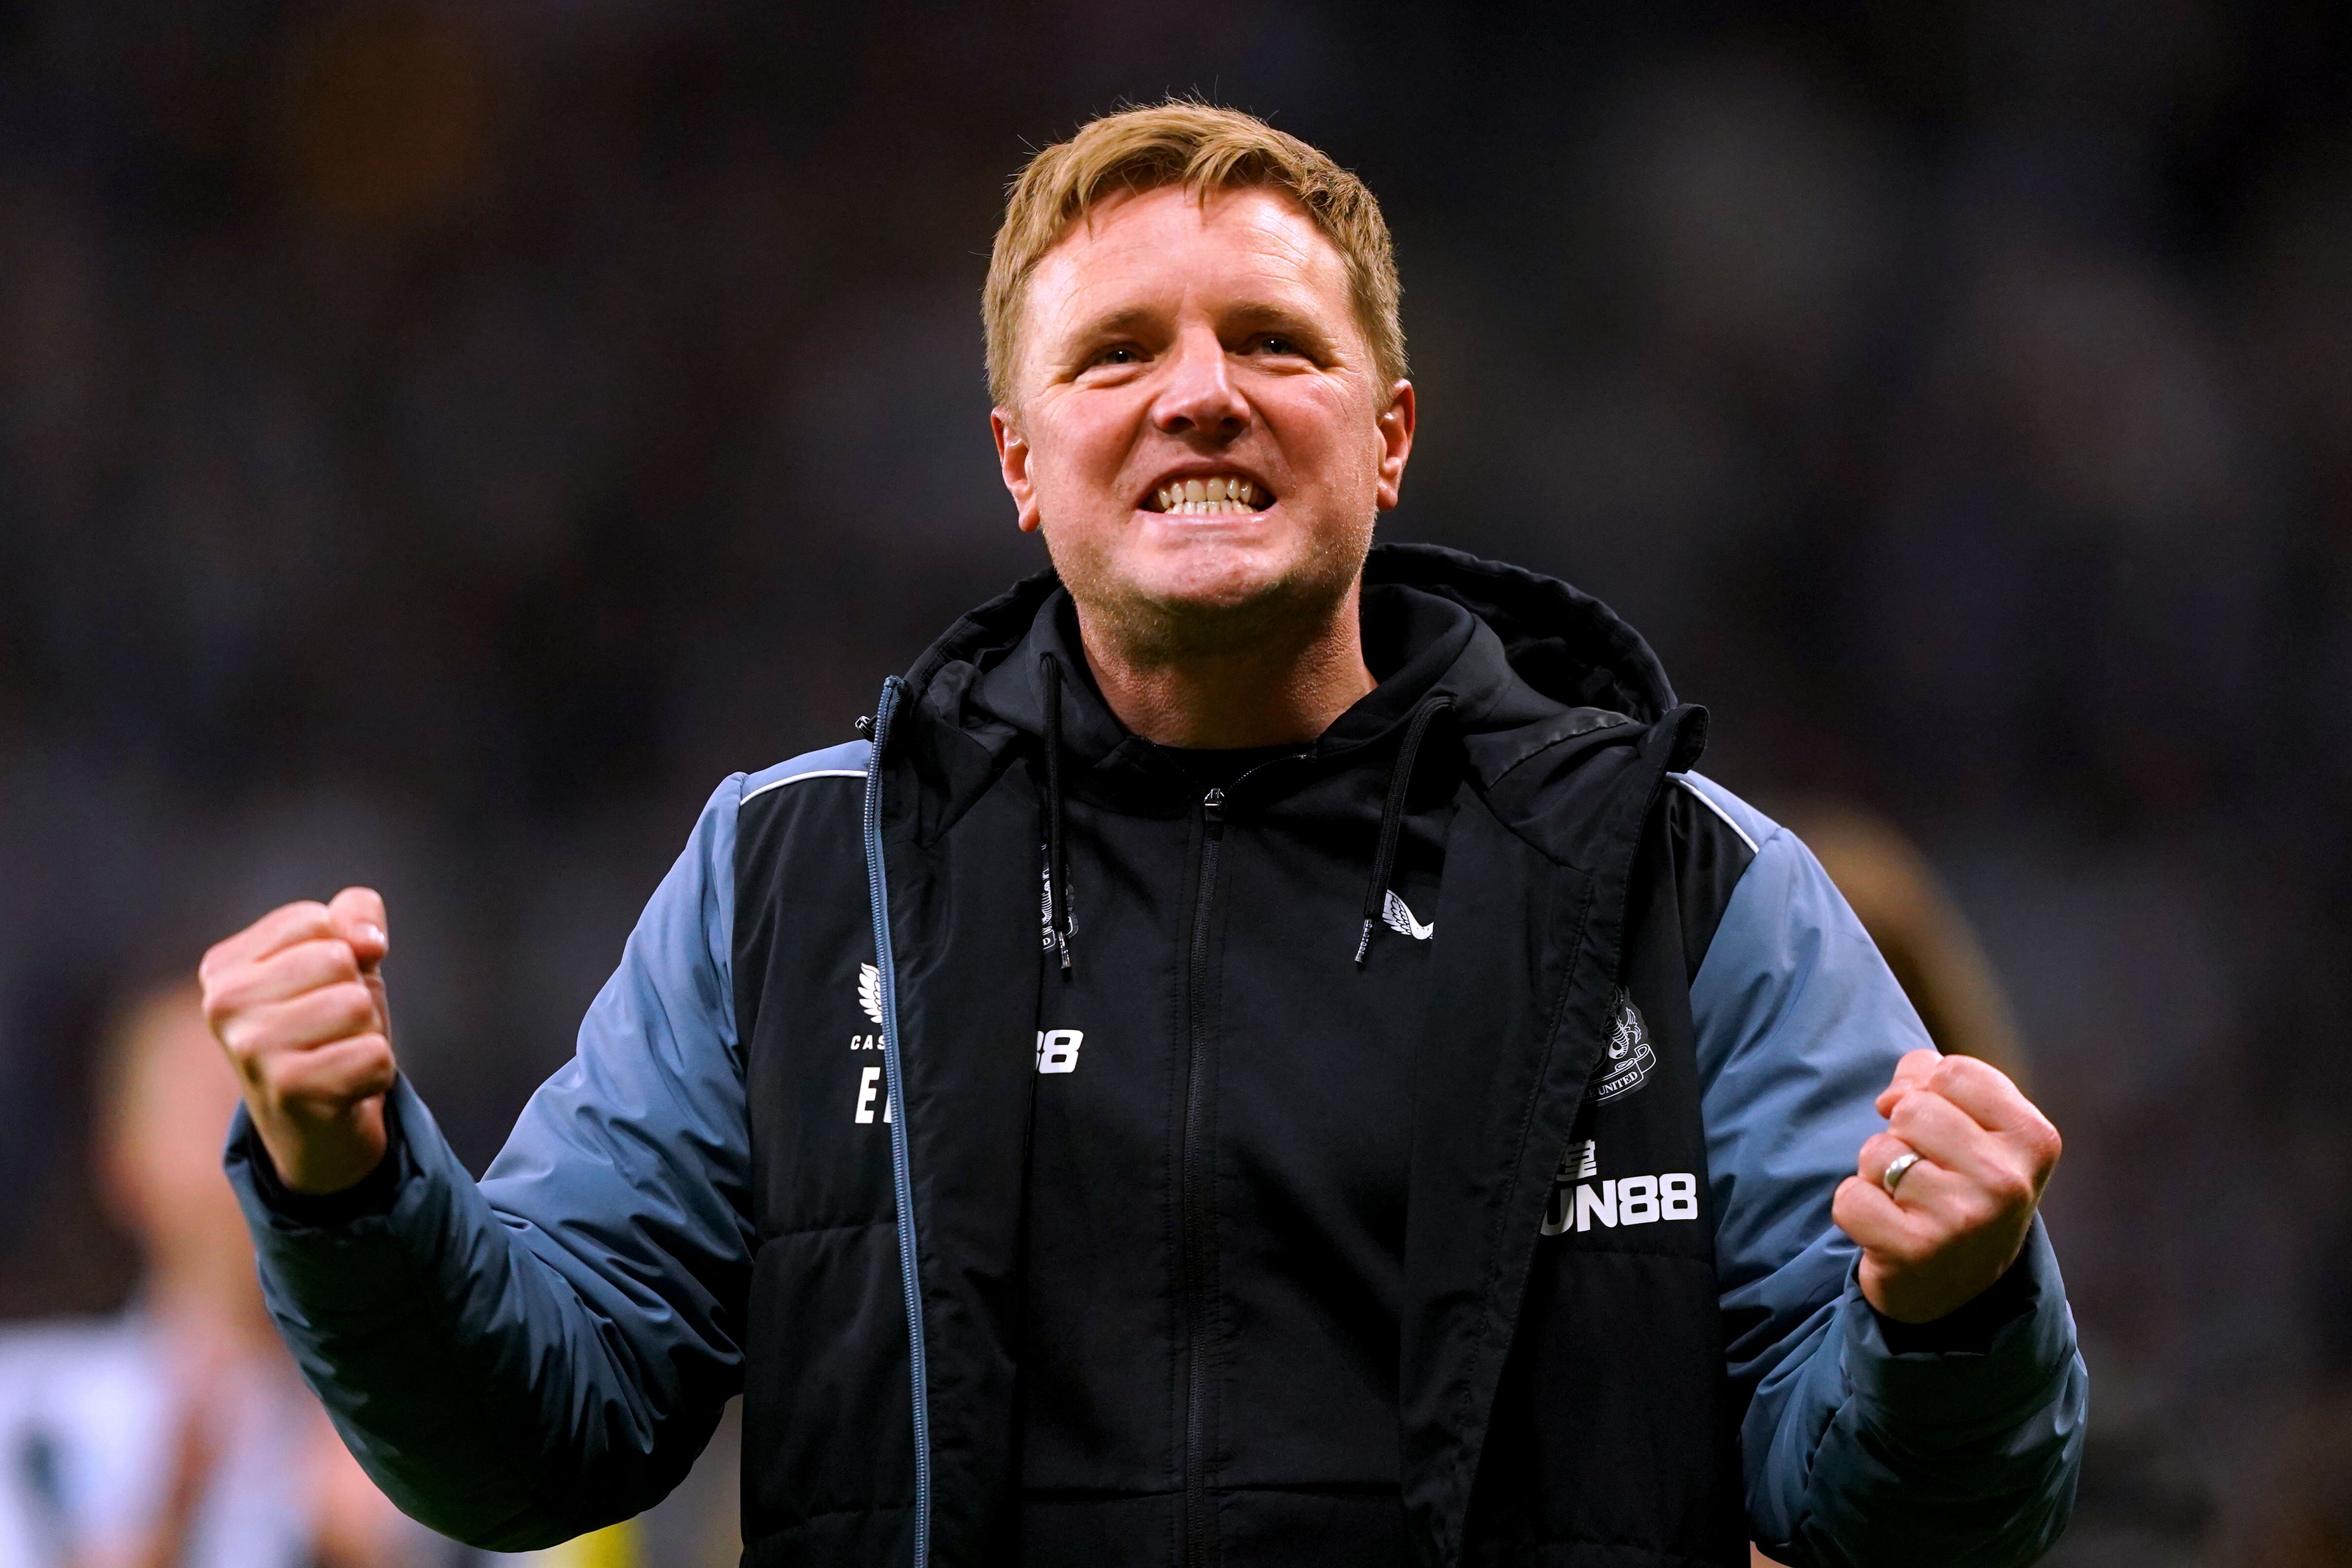 Newcastle have 'shot ahead of schedule' with top-four finish – Eddie Howe |  The Independent